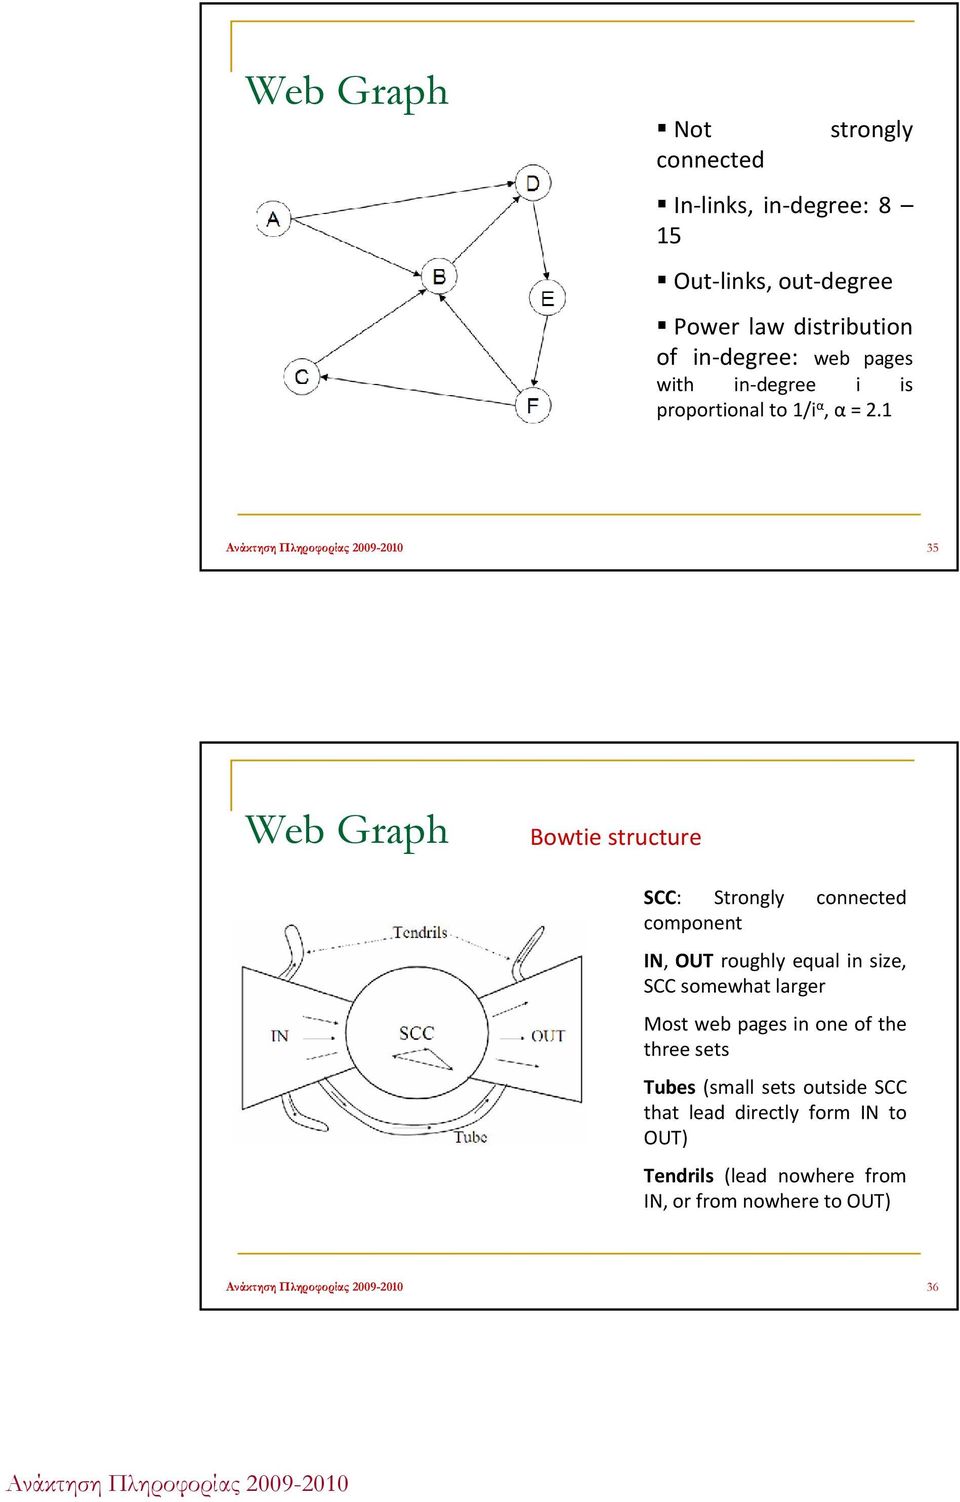 1 35 Web Graph Bowtie structure SCC: Strongly connected component IN, OUT roughly equal in size, SCC somewhat